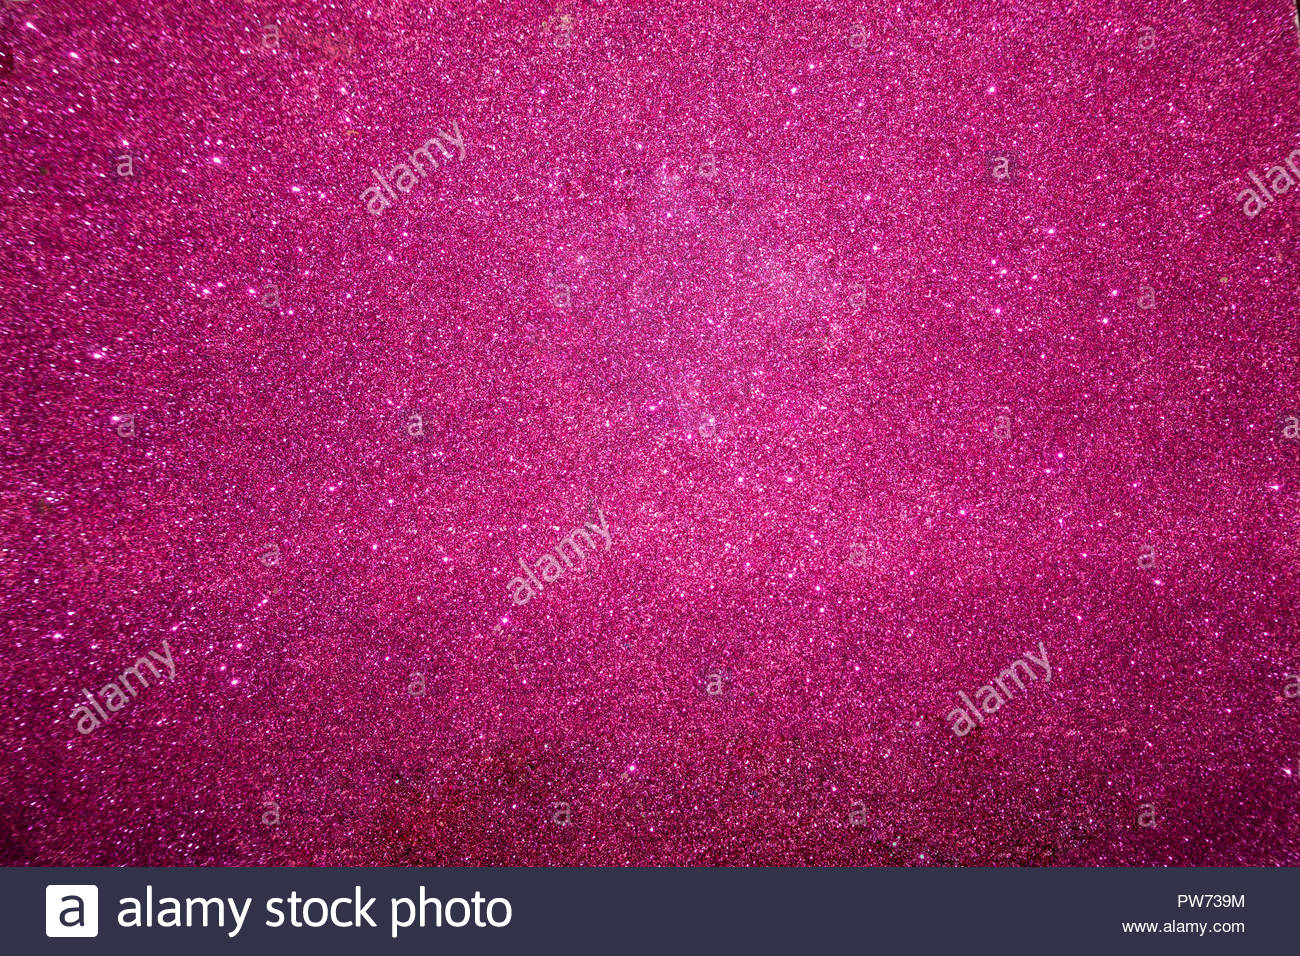 Abstract grunge surface pink fuchsia background golden yellow